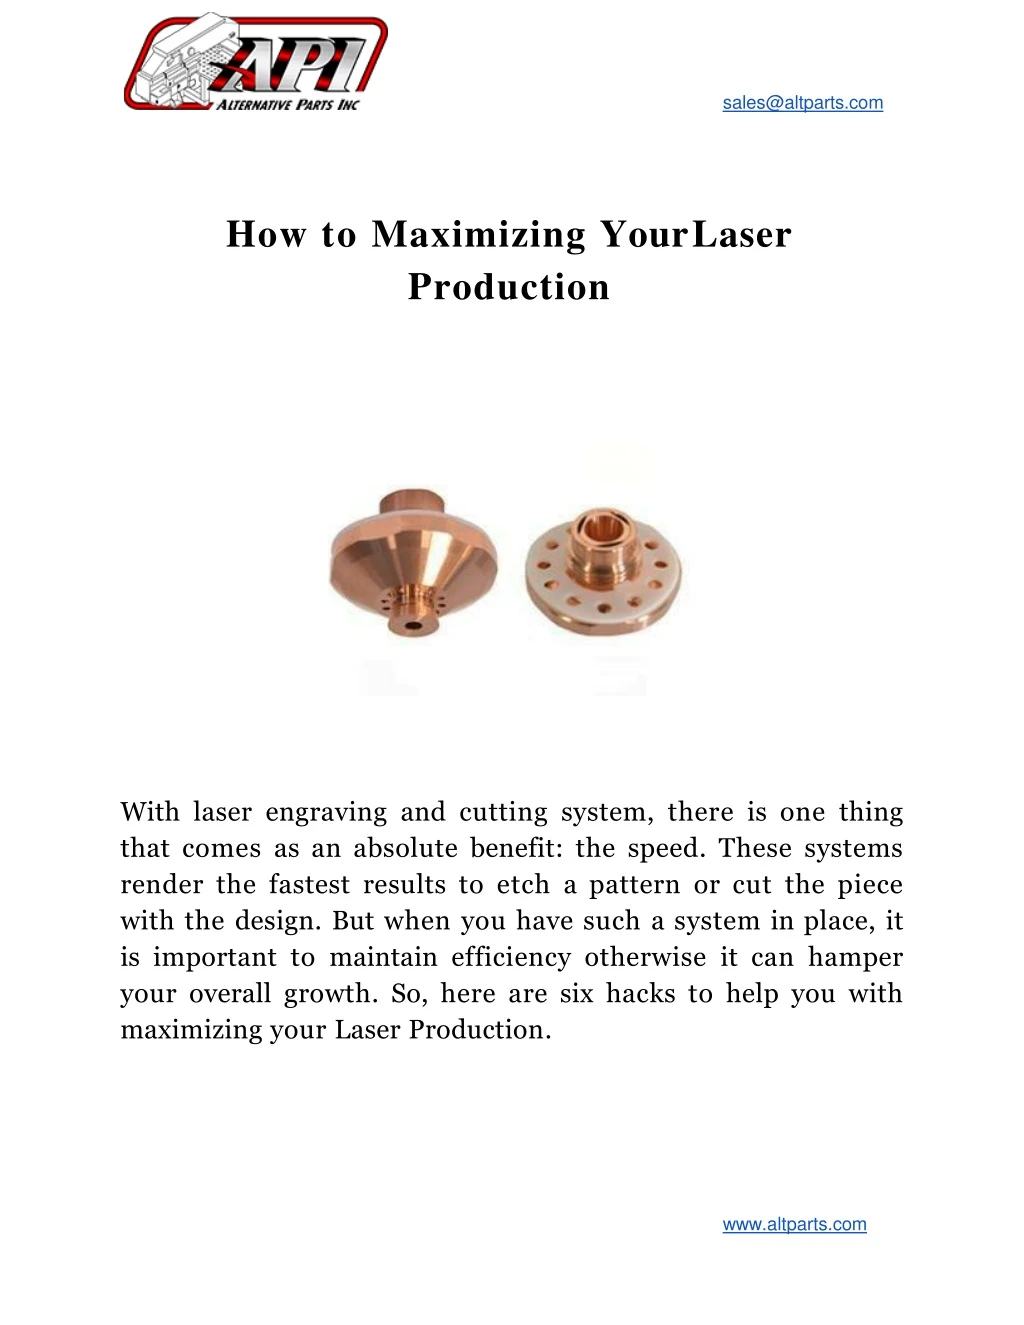 how to maximizing your laser production